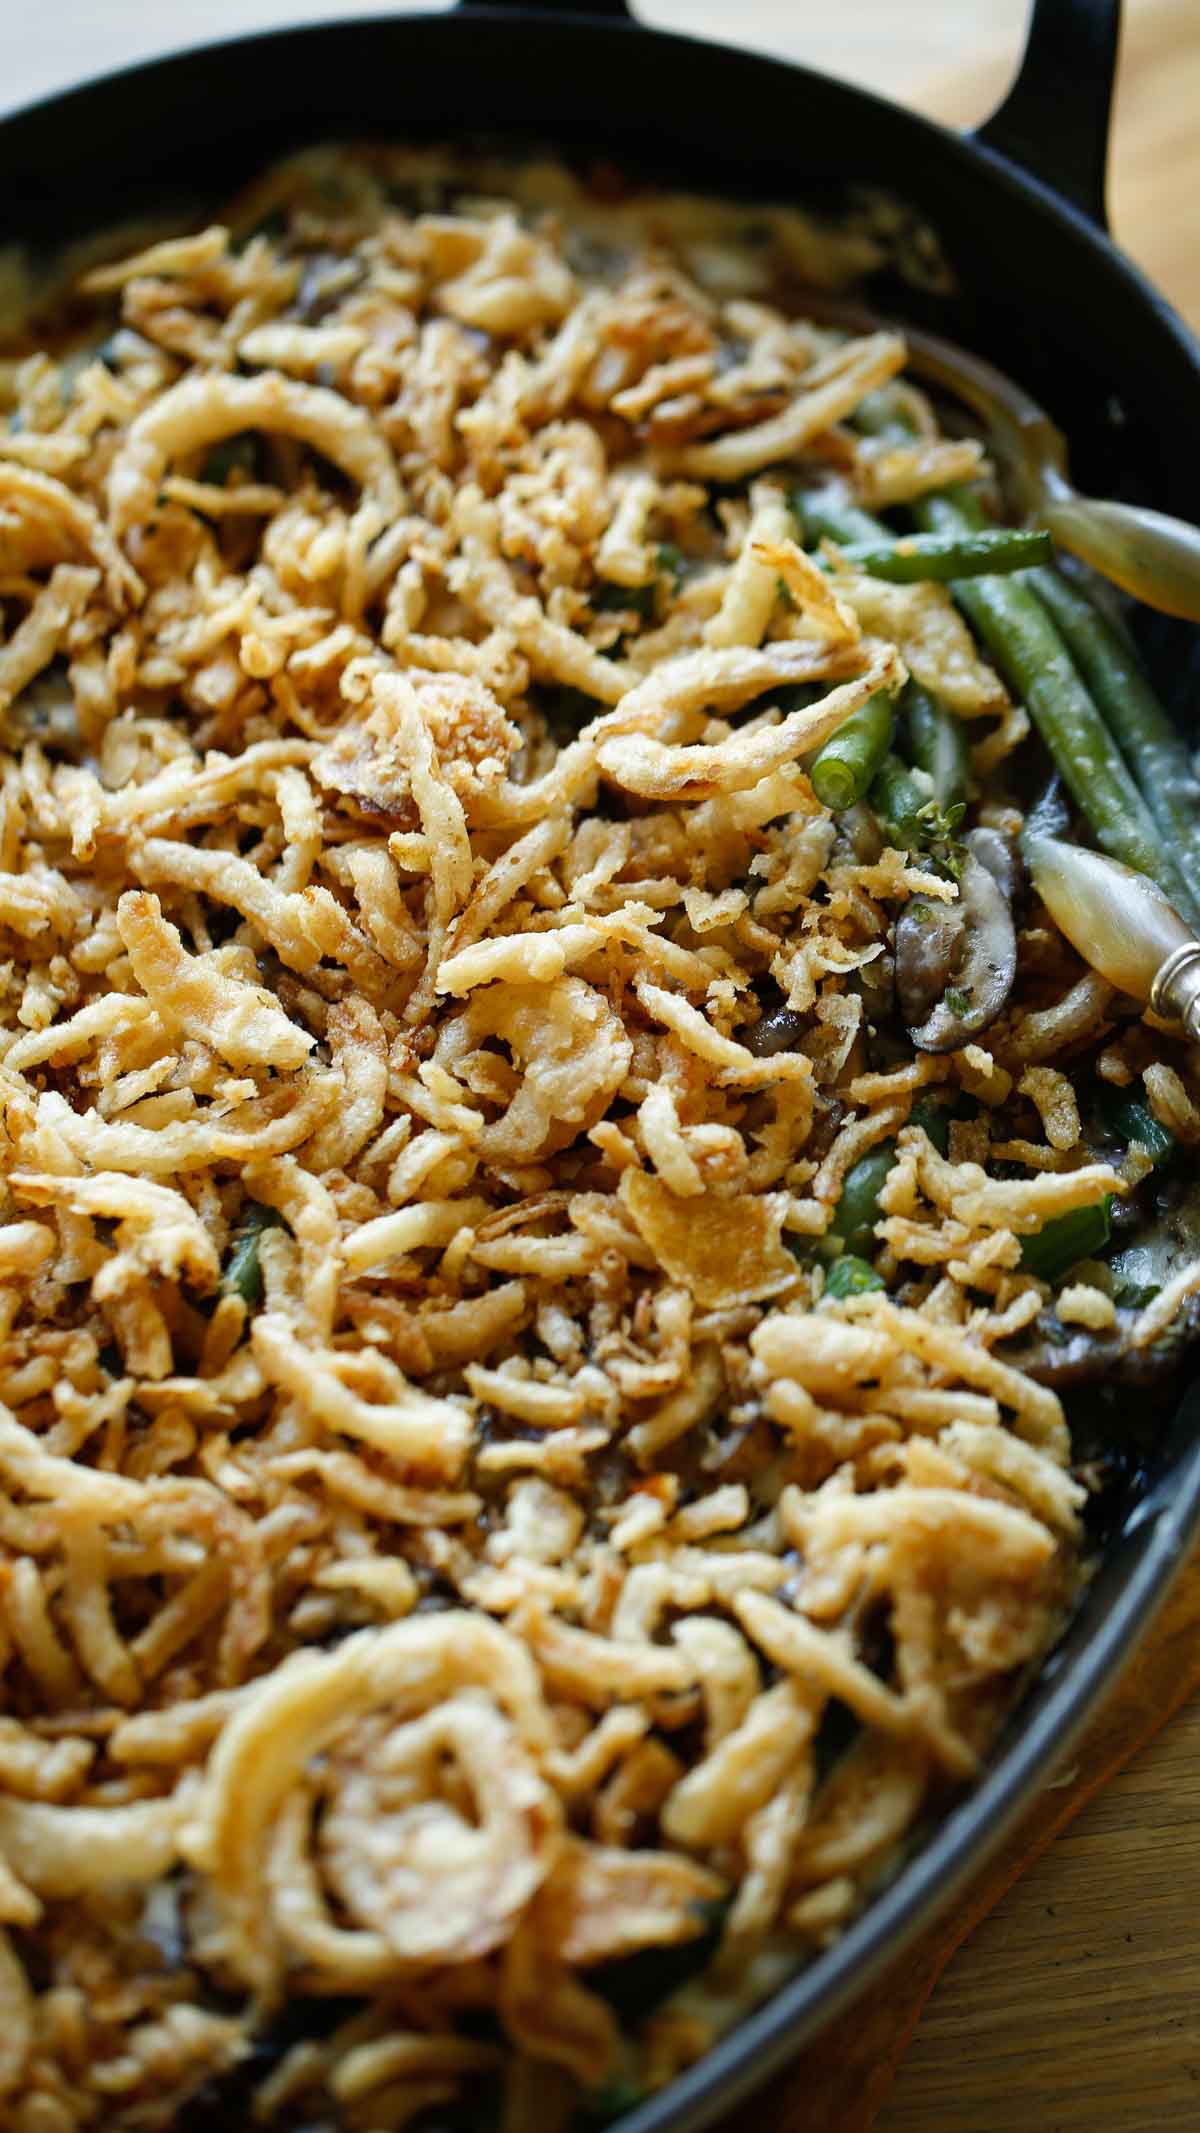 Green beans covered in crispy fried onions